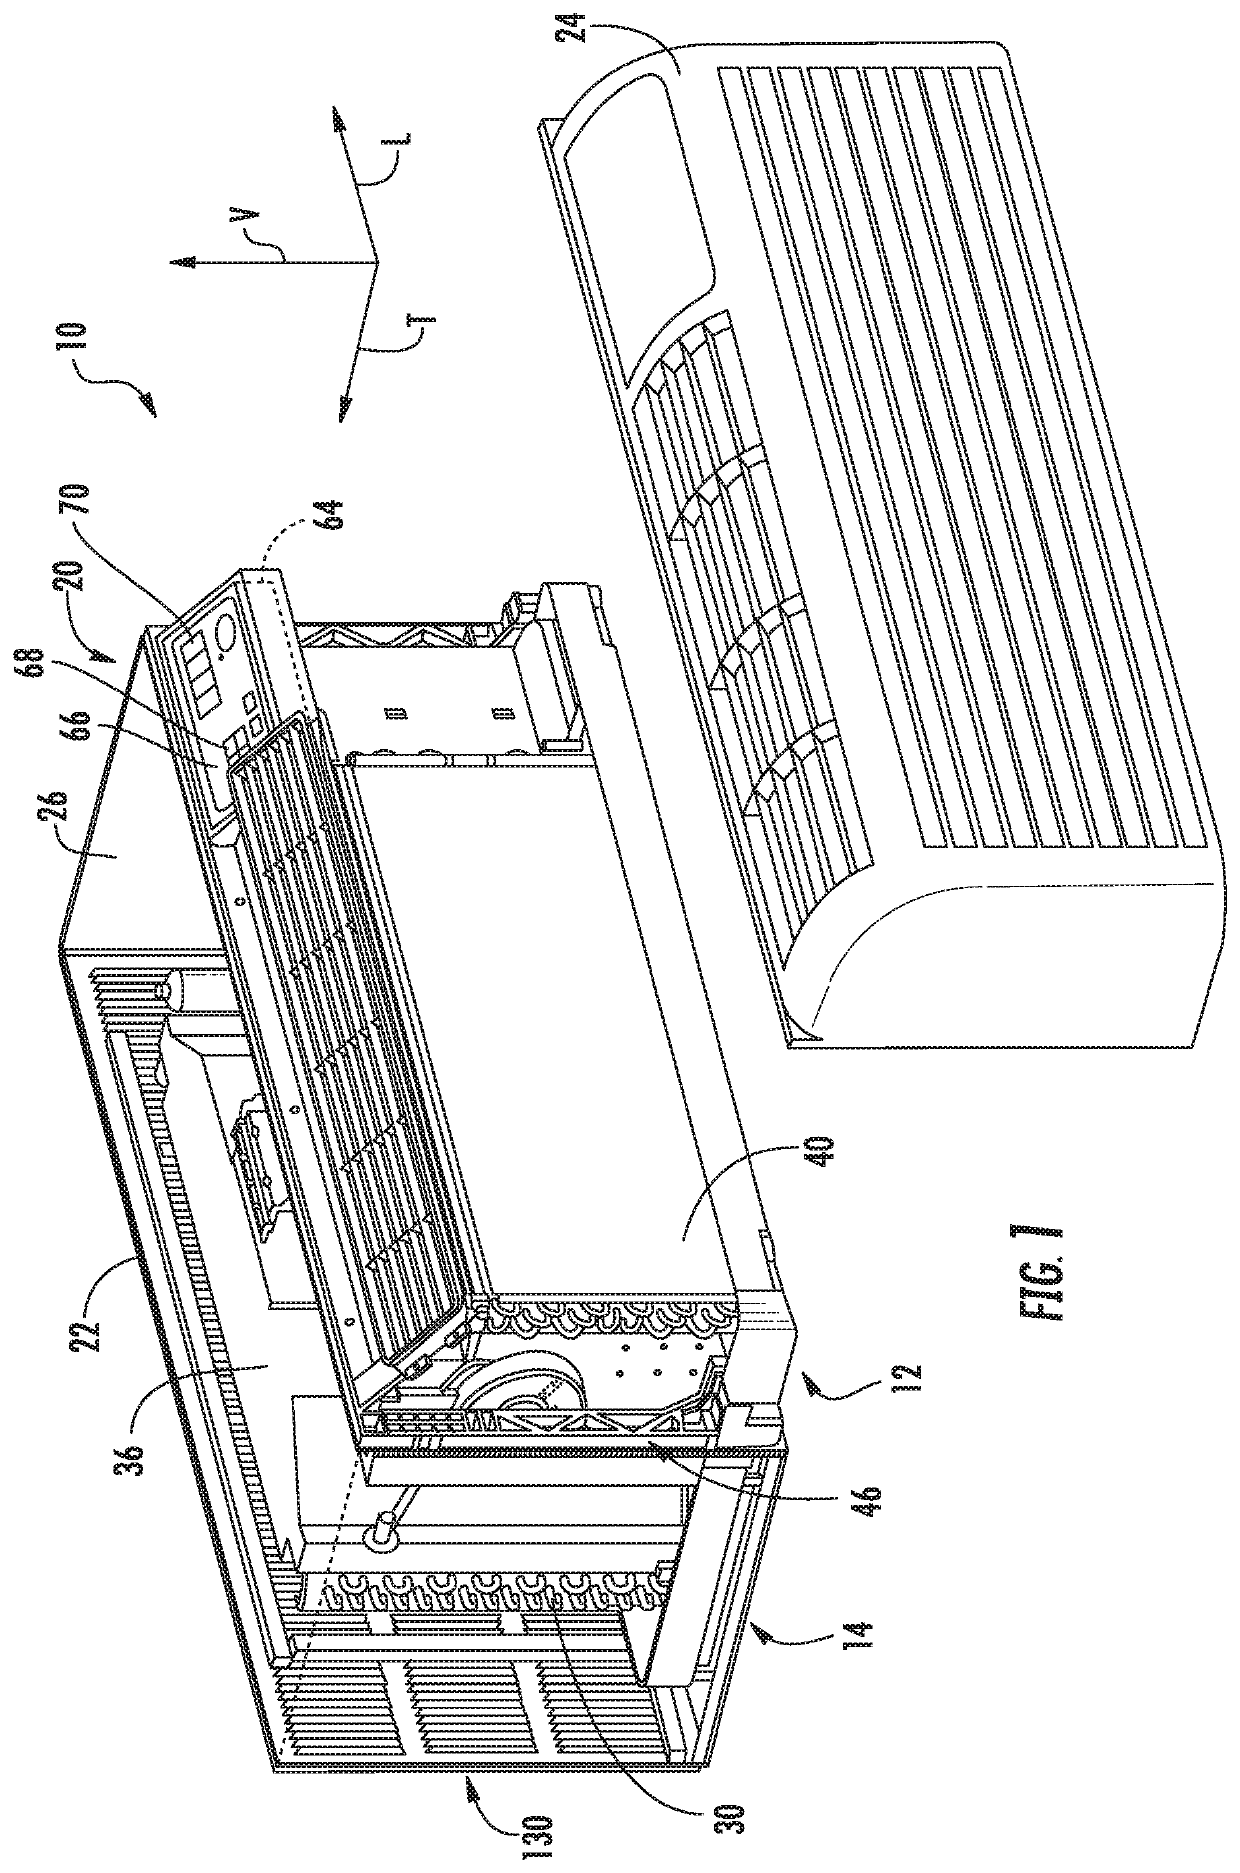 Fan assembly for a packaged terminal air conditioner unit